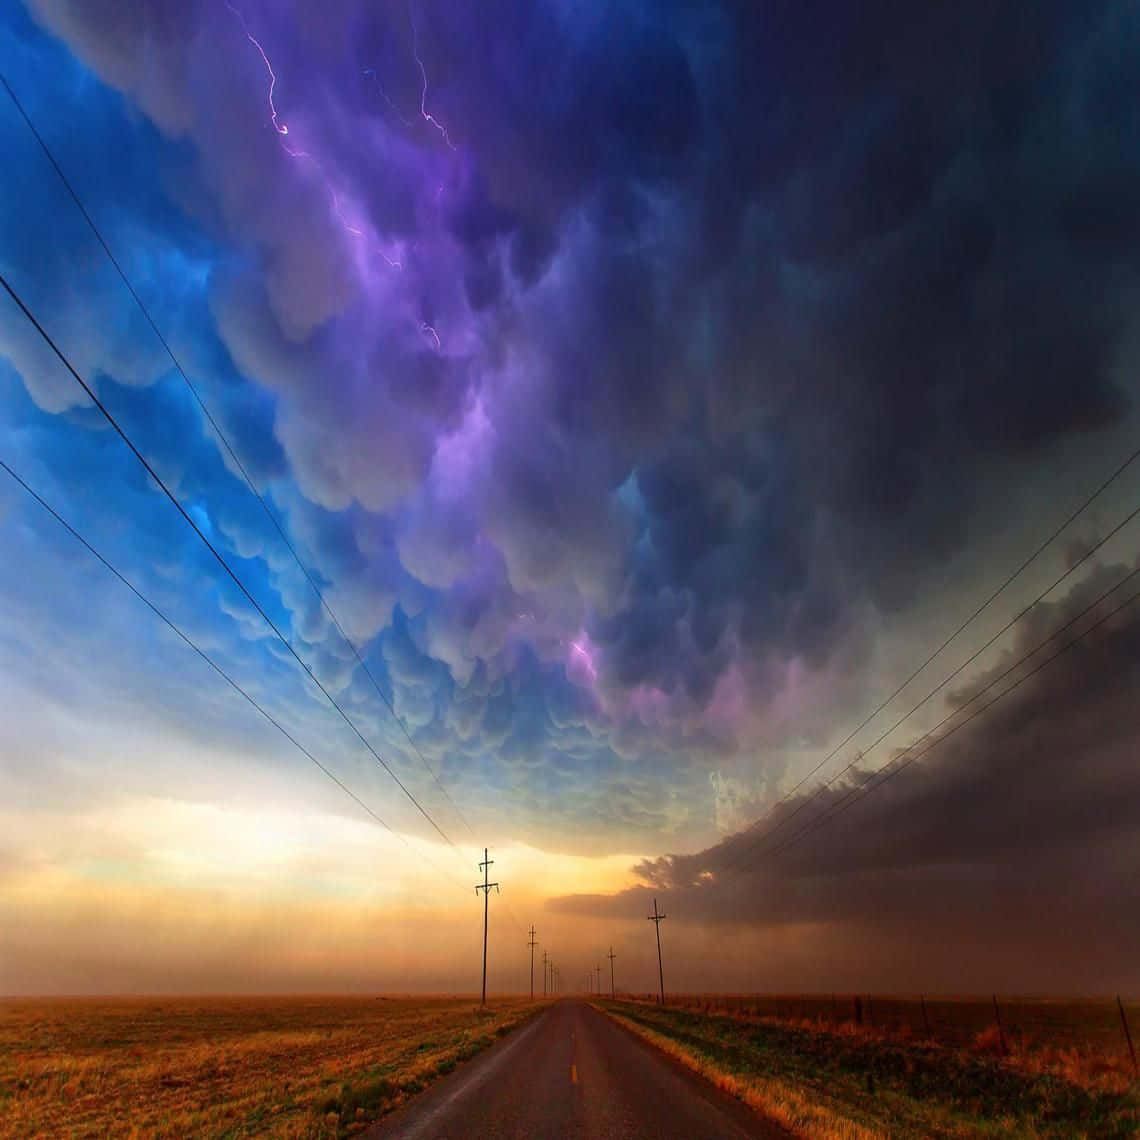 Download Lightning Over A Road With Power Lines | Wallpapers.com